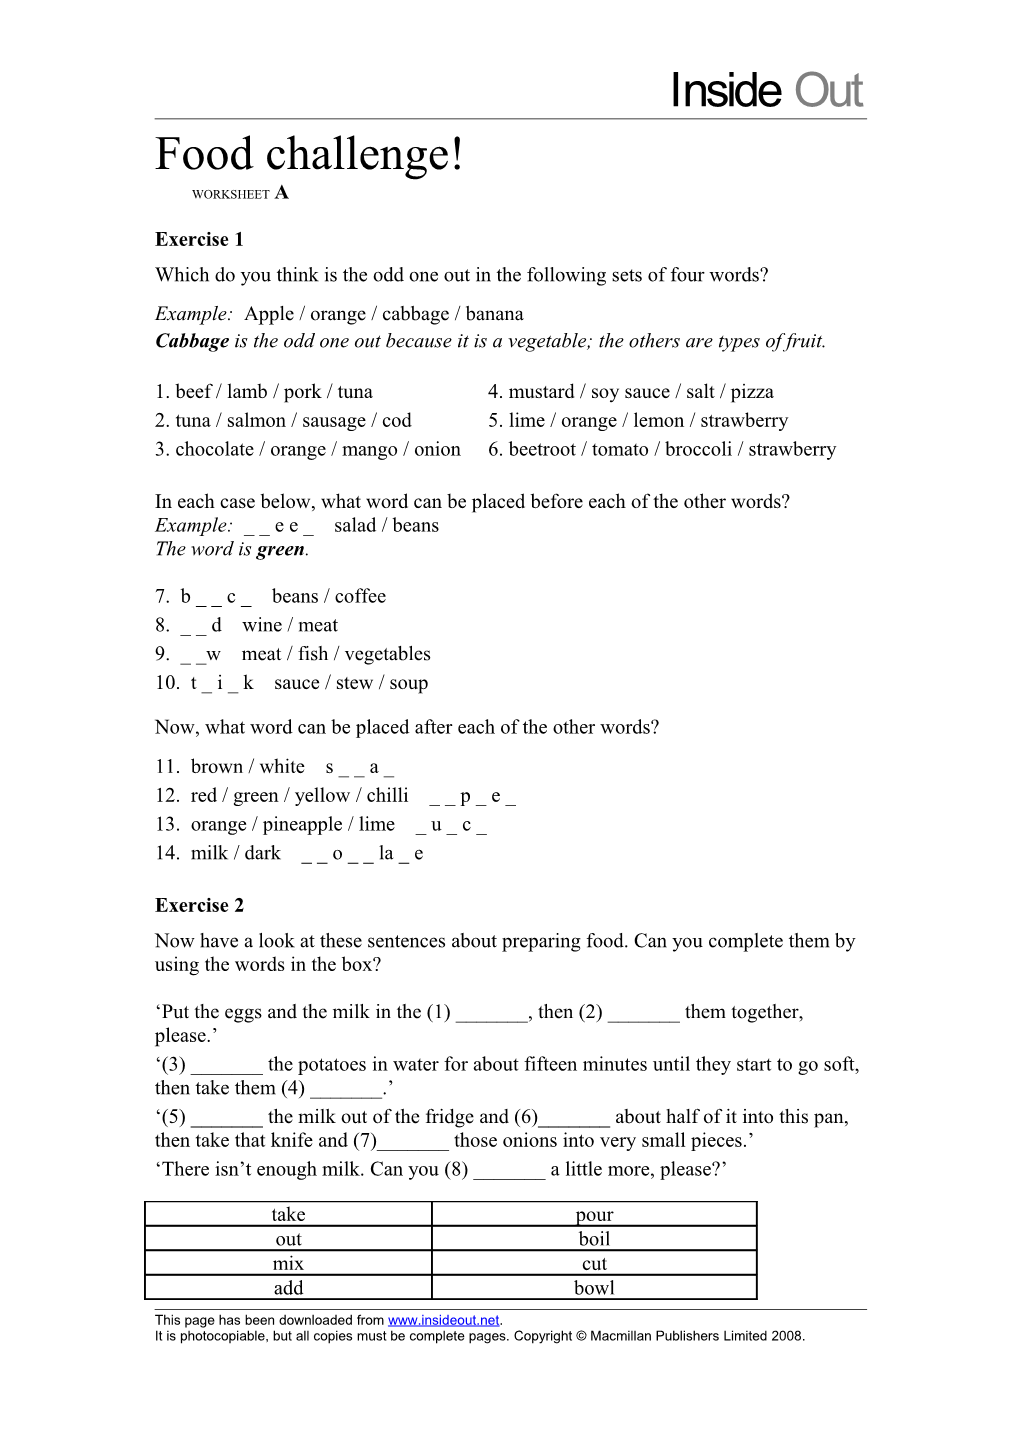 National Dishes WORKSHEET A